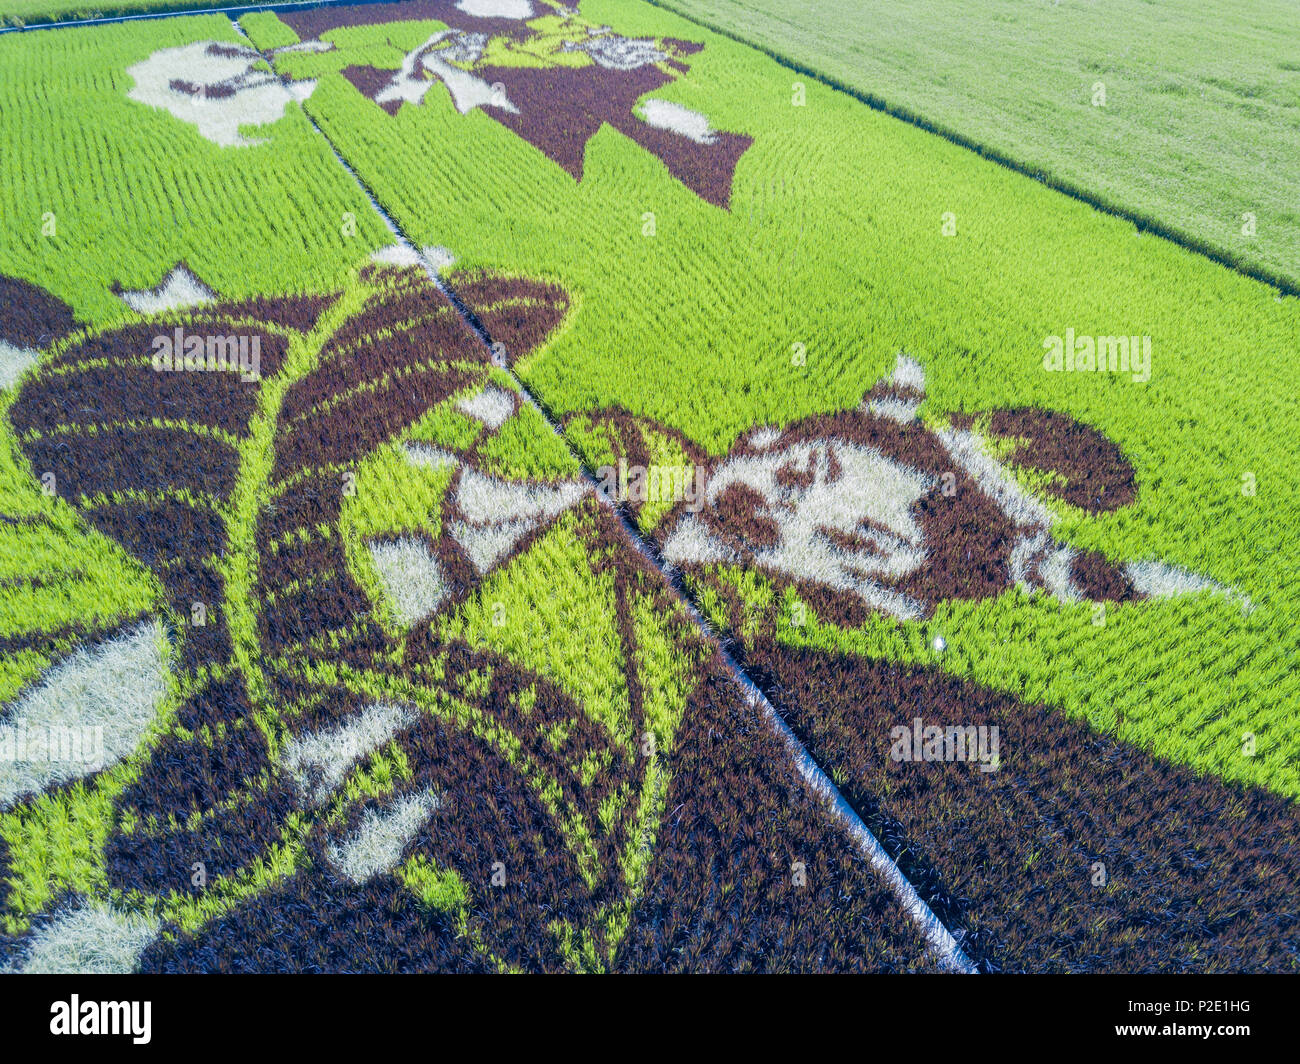 Aerial view of the beautiful Paddy field painting at Yuanli, Taiwan Stock Photo